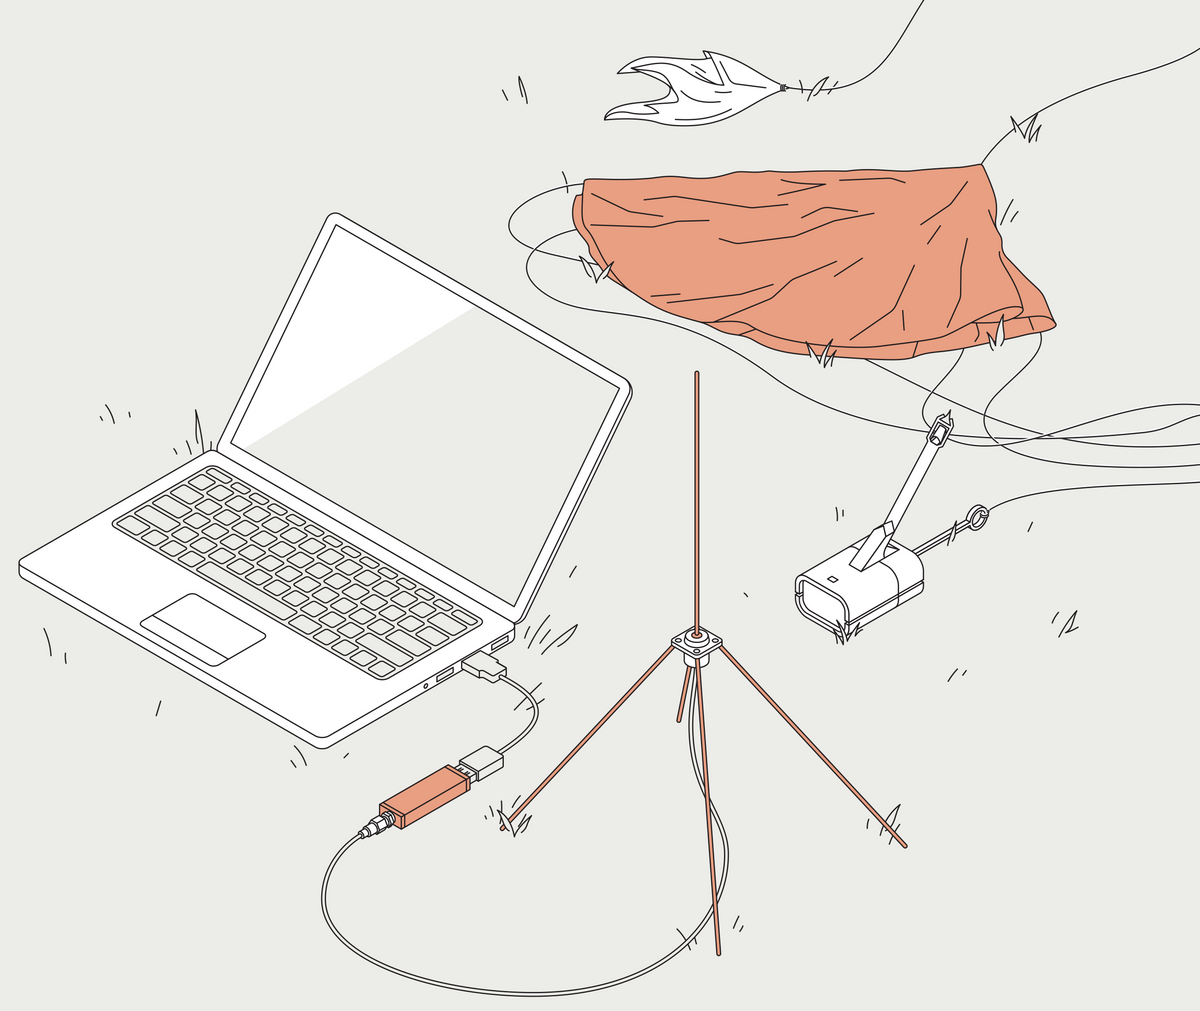 An antenna with four downward pointing radials sits on the ground, connected to a dongle. The dongle is in turn connected to a laptop. A boxy radiosonde sits nearby, attached to the remains of a parachute.